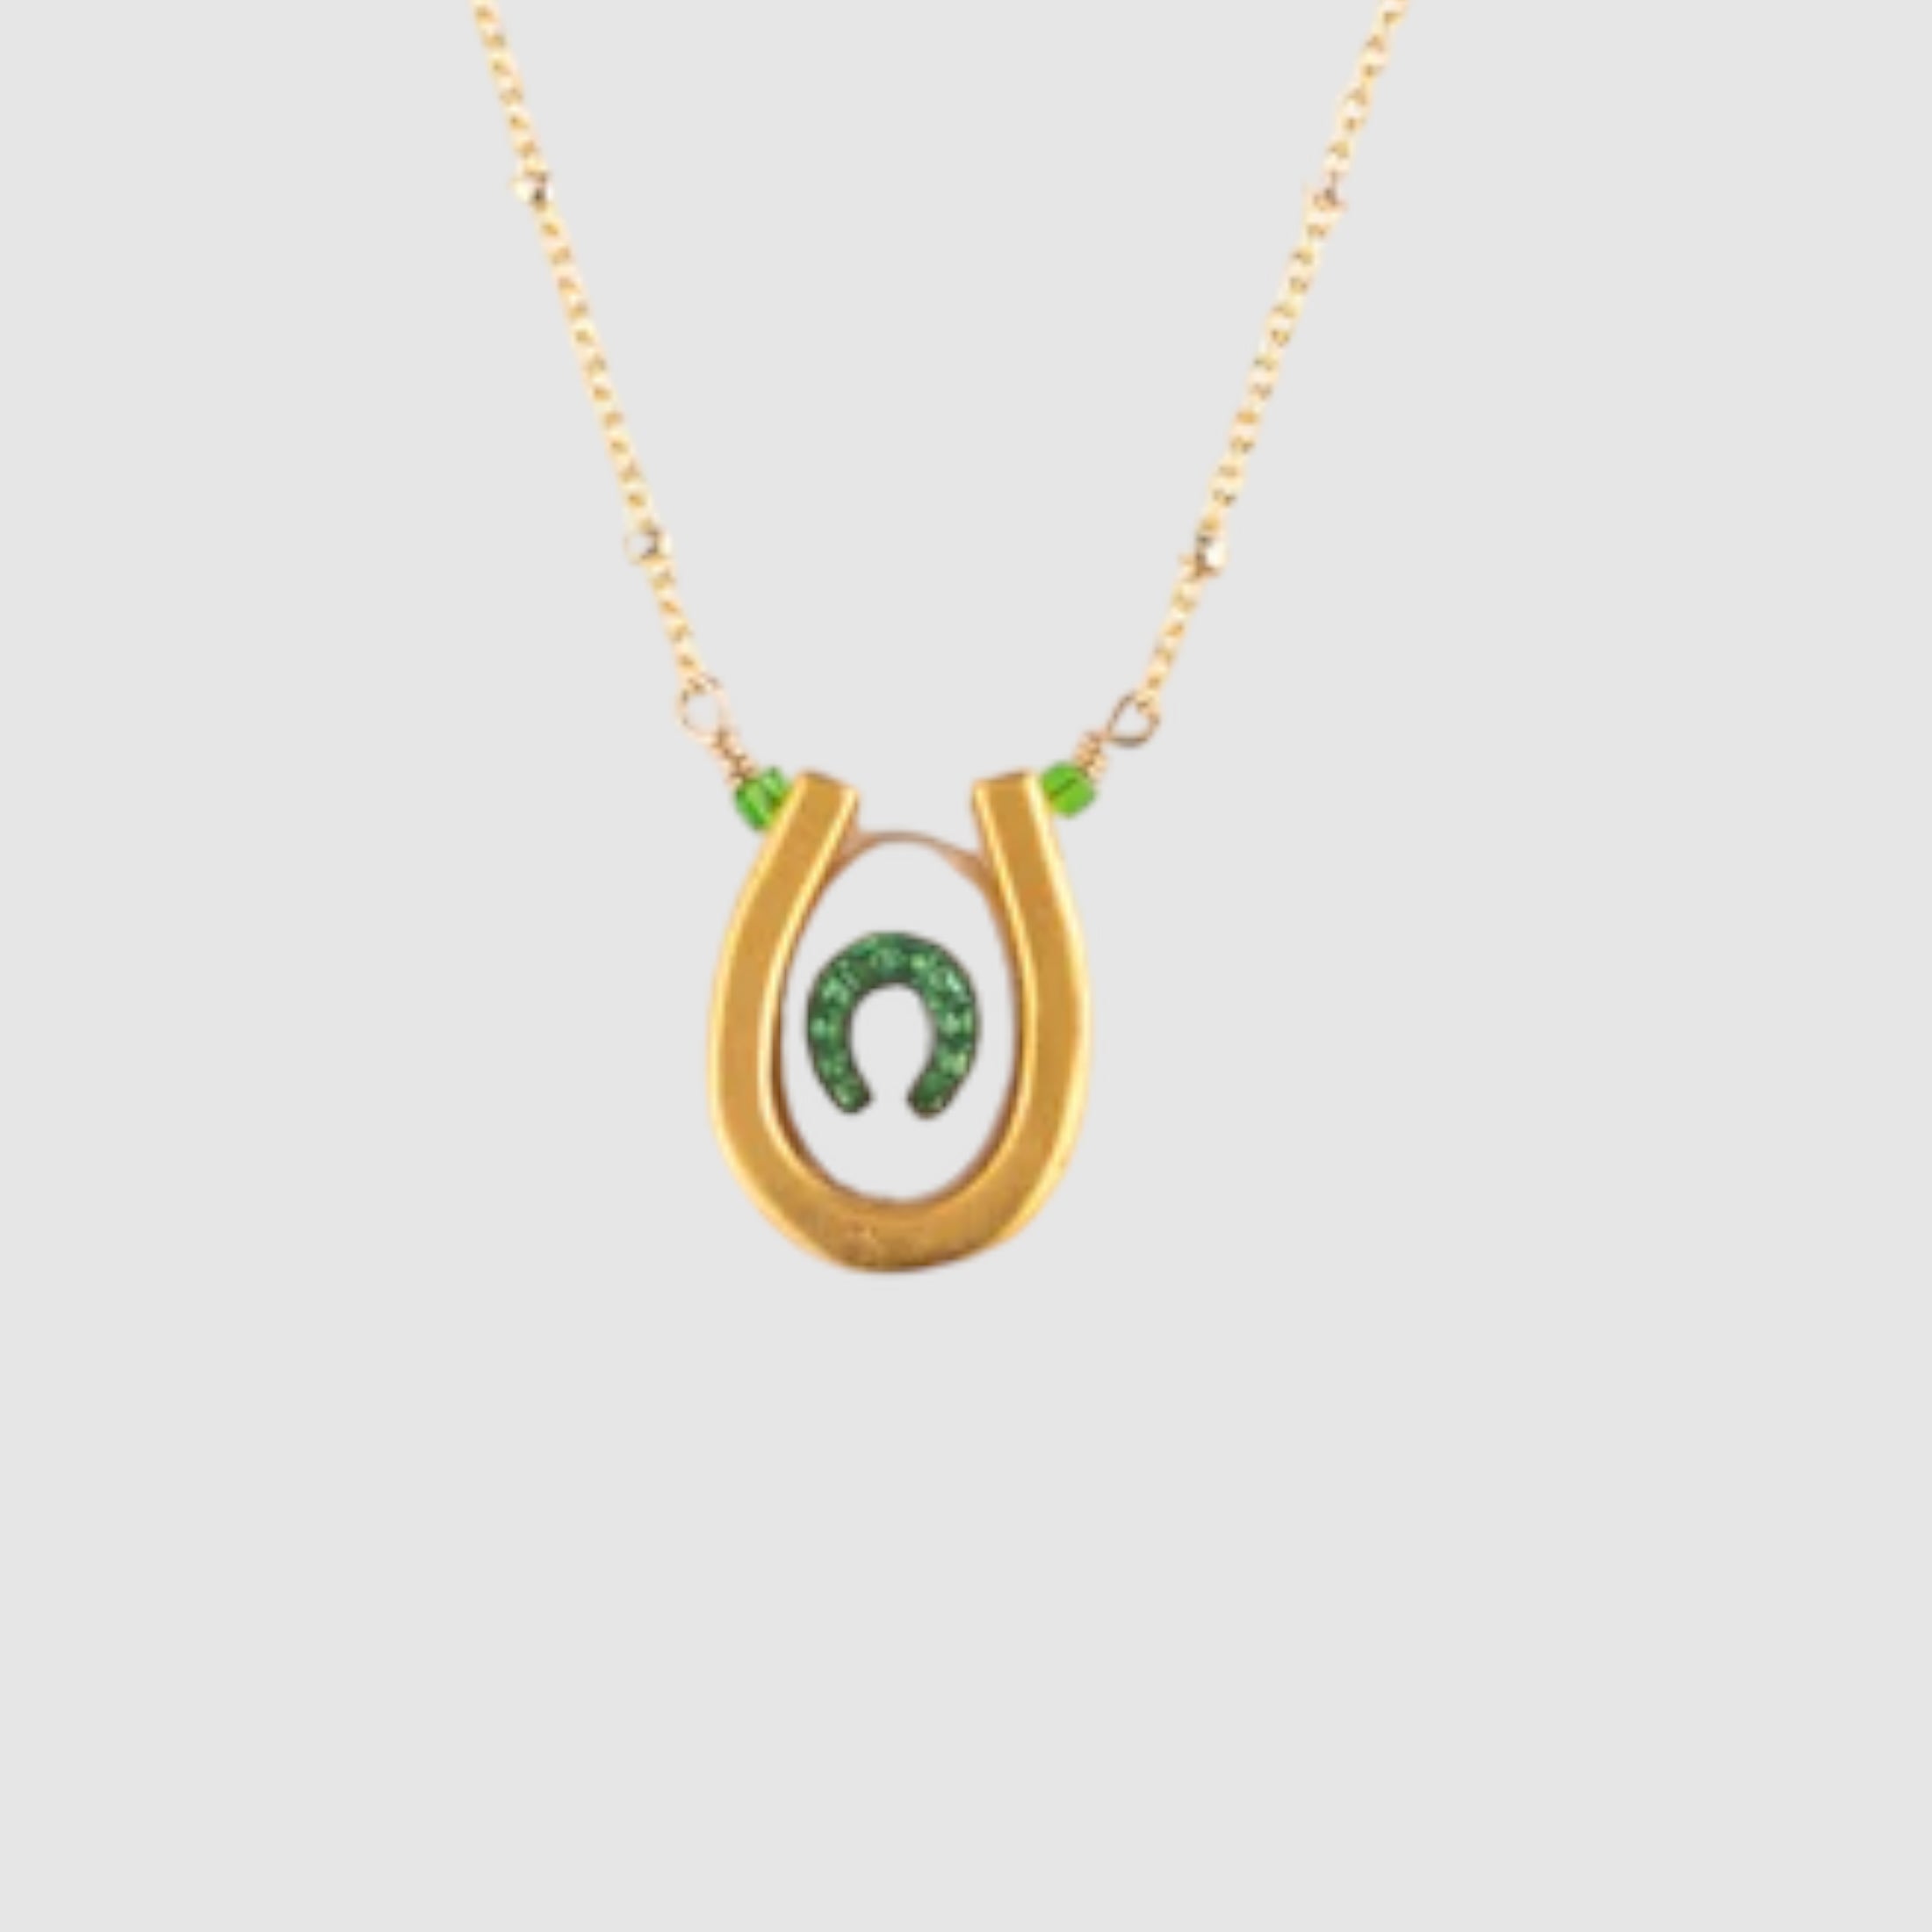 DOUBLE LUCK // VERMEIL NECKLACE // WHITE & GREEN